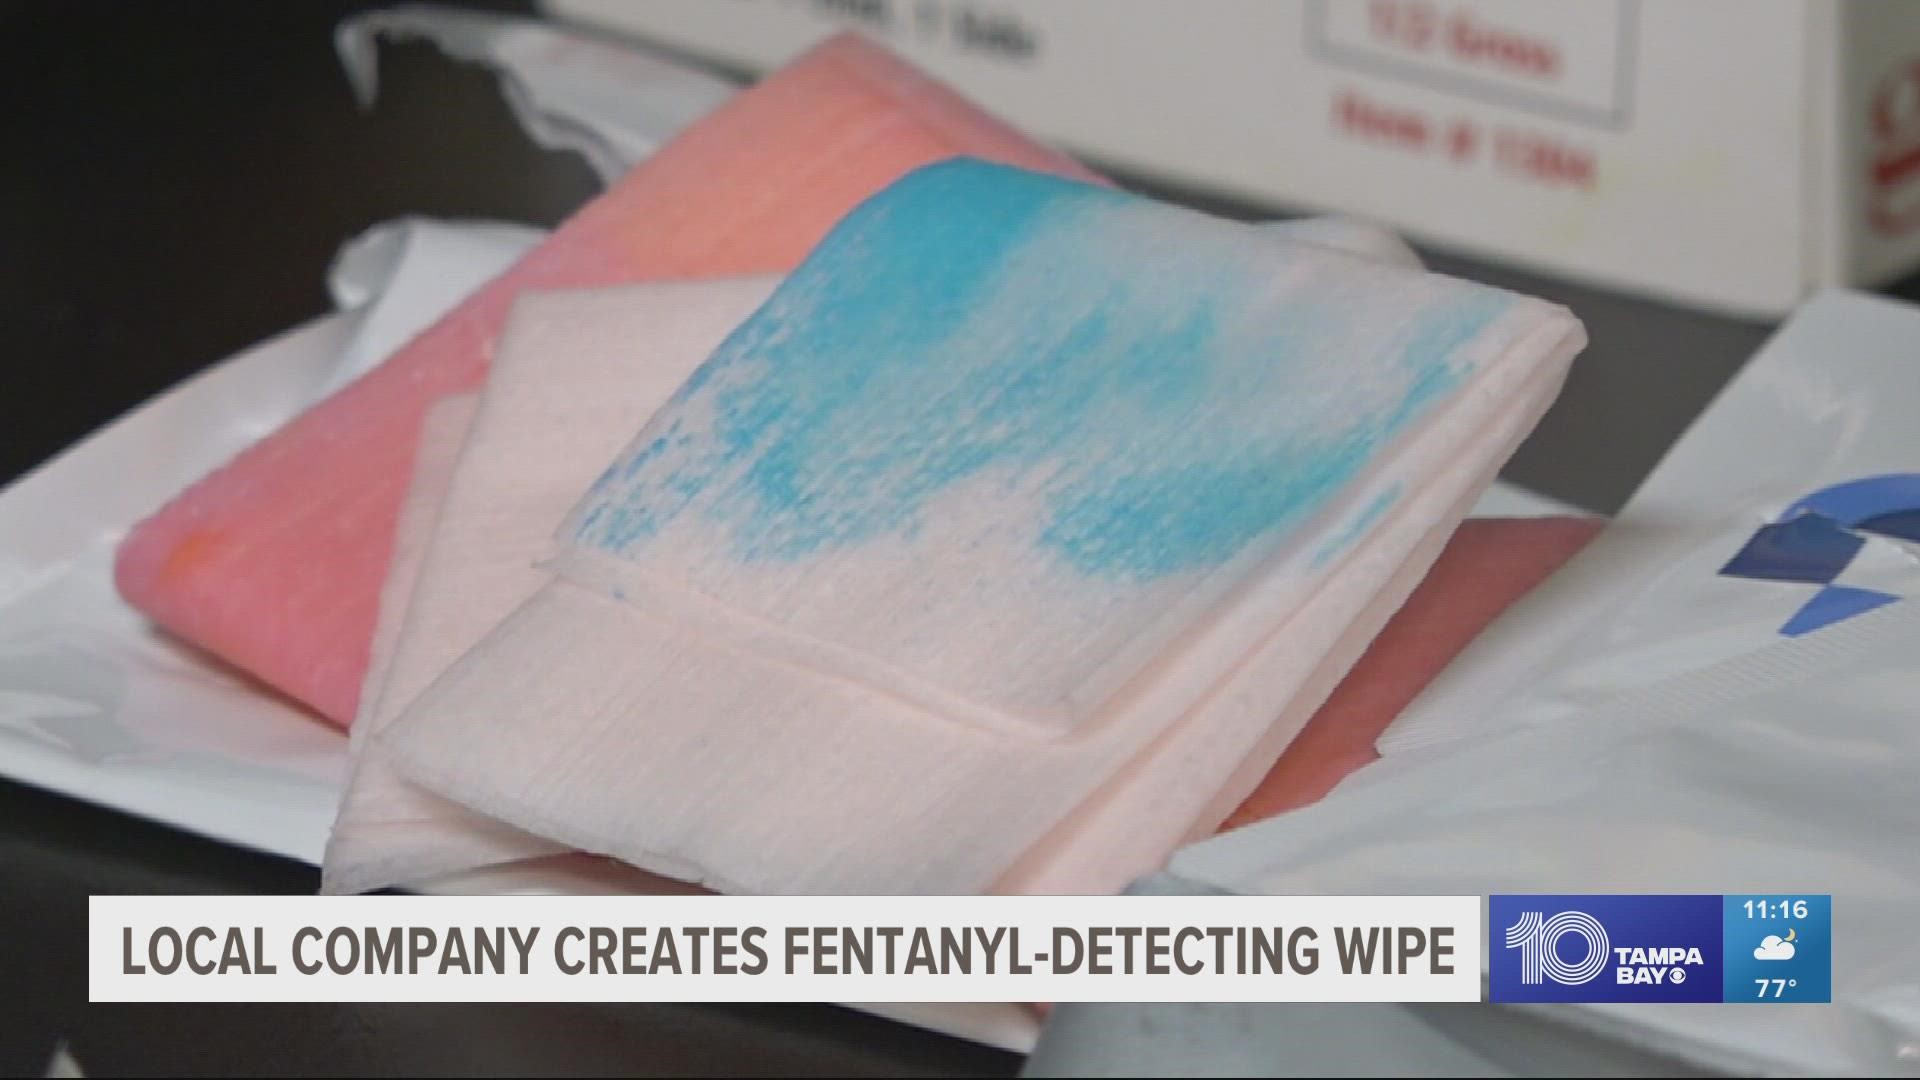 The Palmetto Police Department has been field-testing the wipes since January and says the results have been 100% in line with the established testing method